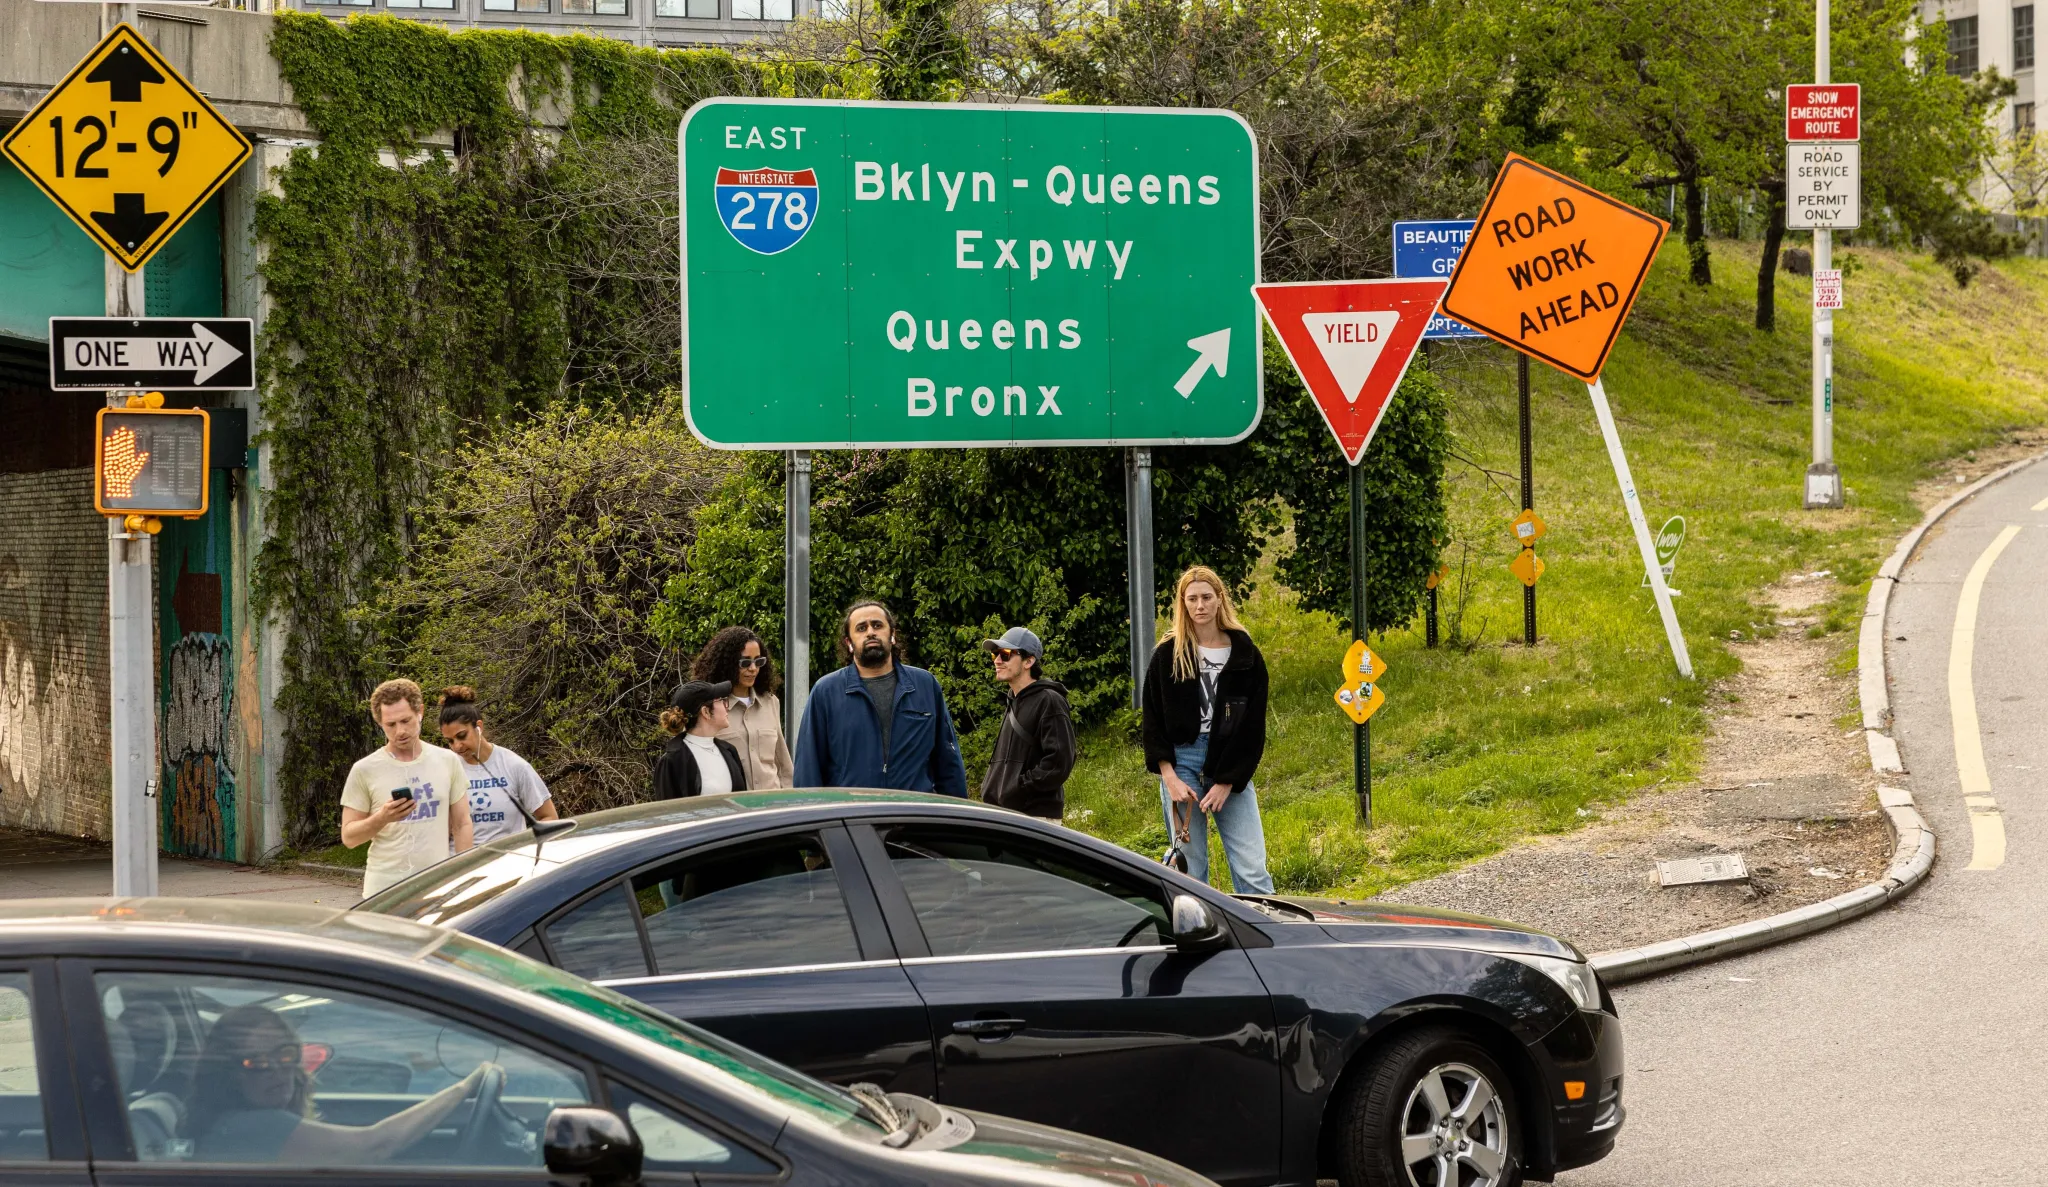 Photo: Josh Katz| The state should no longer design roads where pedestrians are just an afterthought, like this entrance to the Brooklyn-Queens Expressway on Atlantic Avenue in Brooklyn.